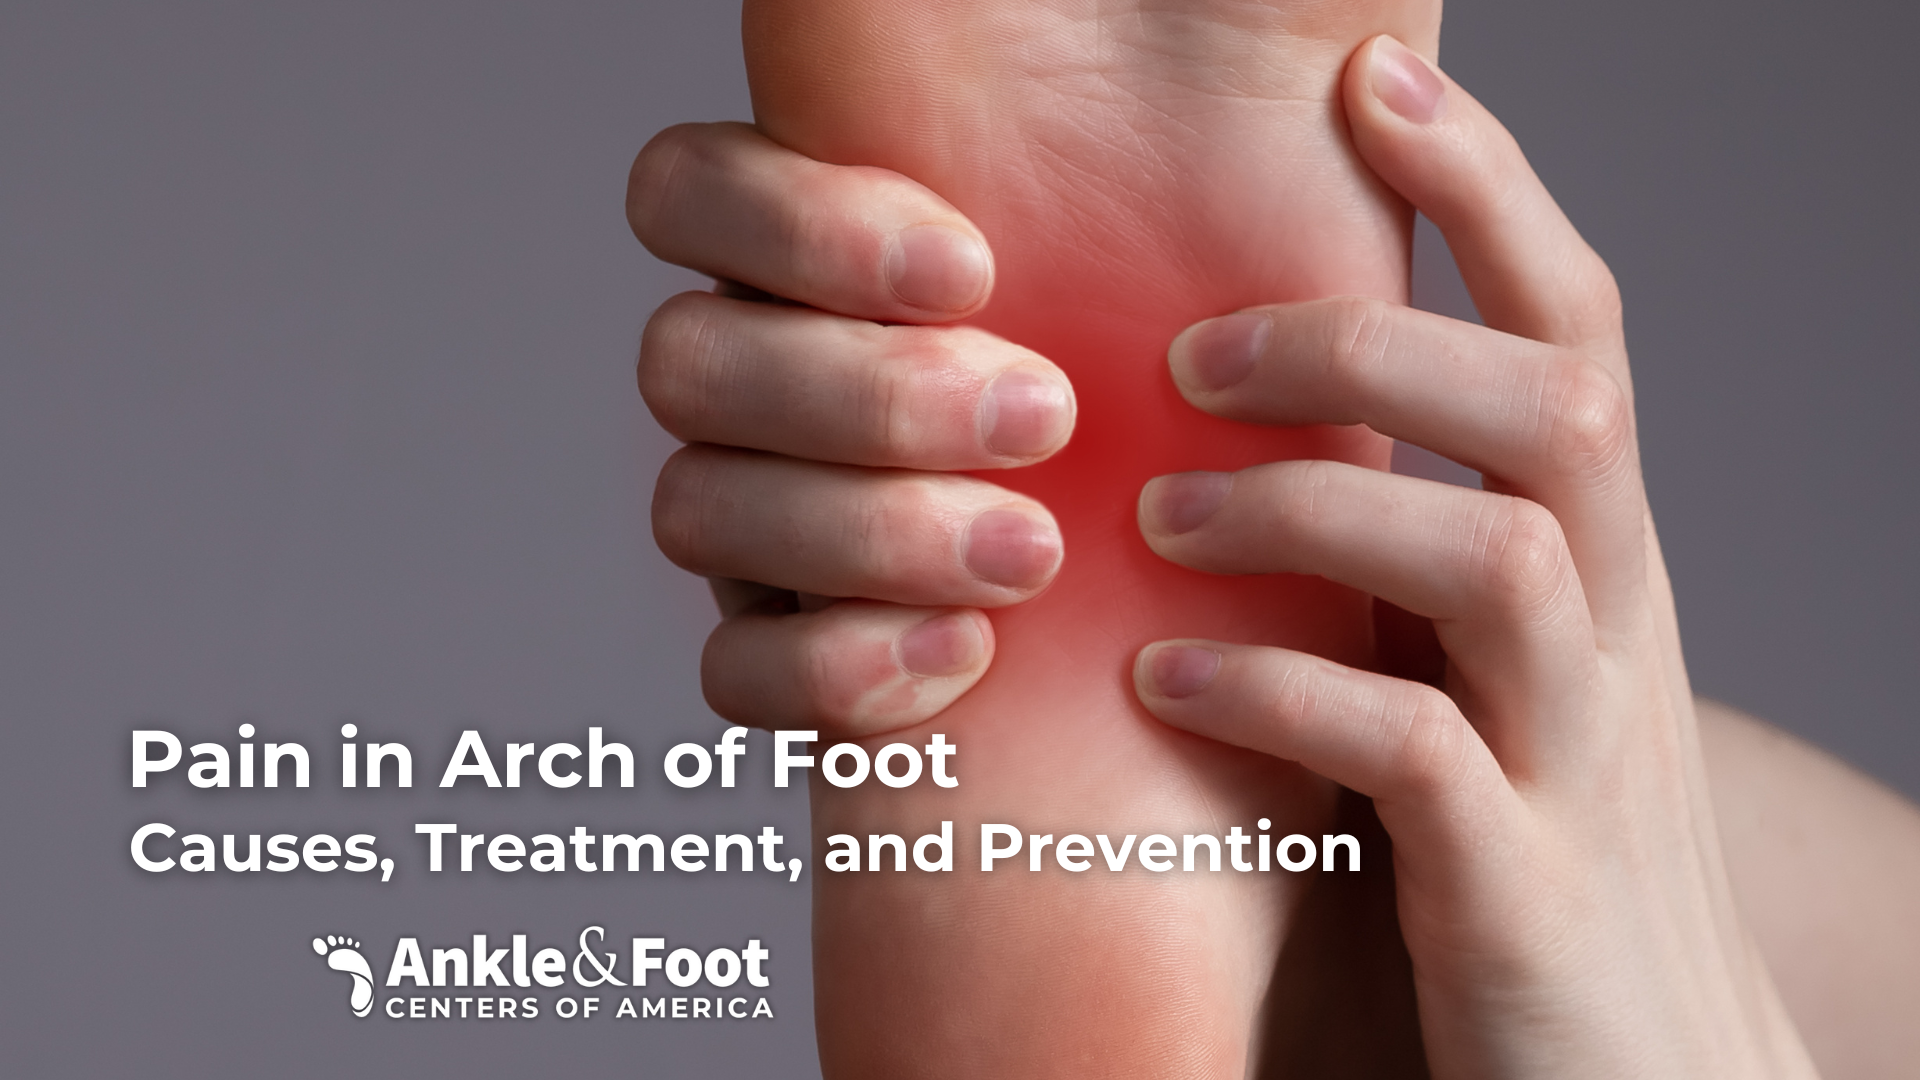 Pain in Arch of Foot: Causes, Treatment, and Prevention